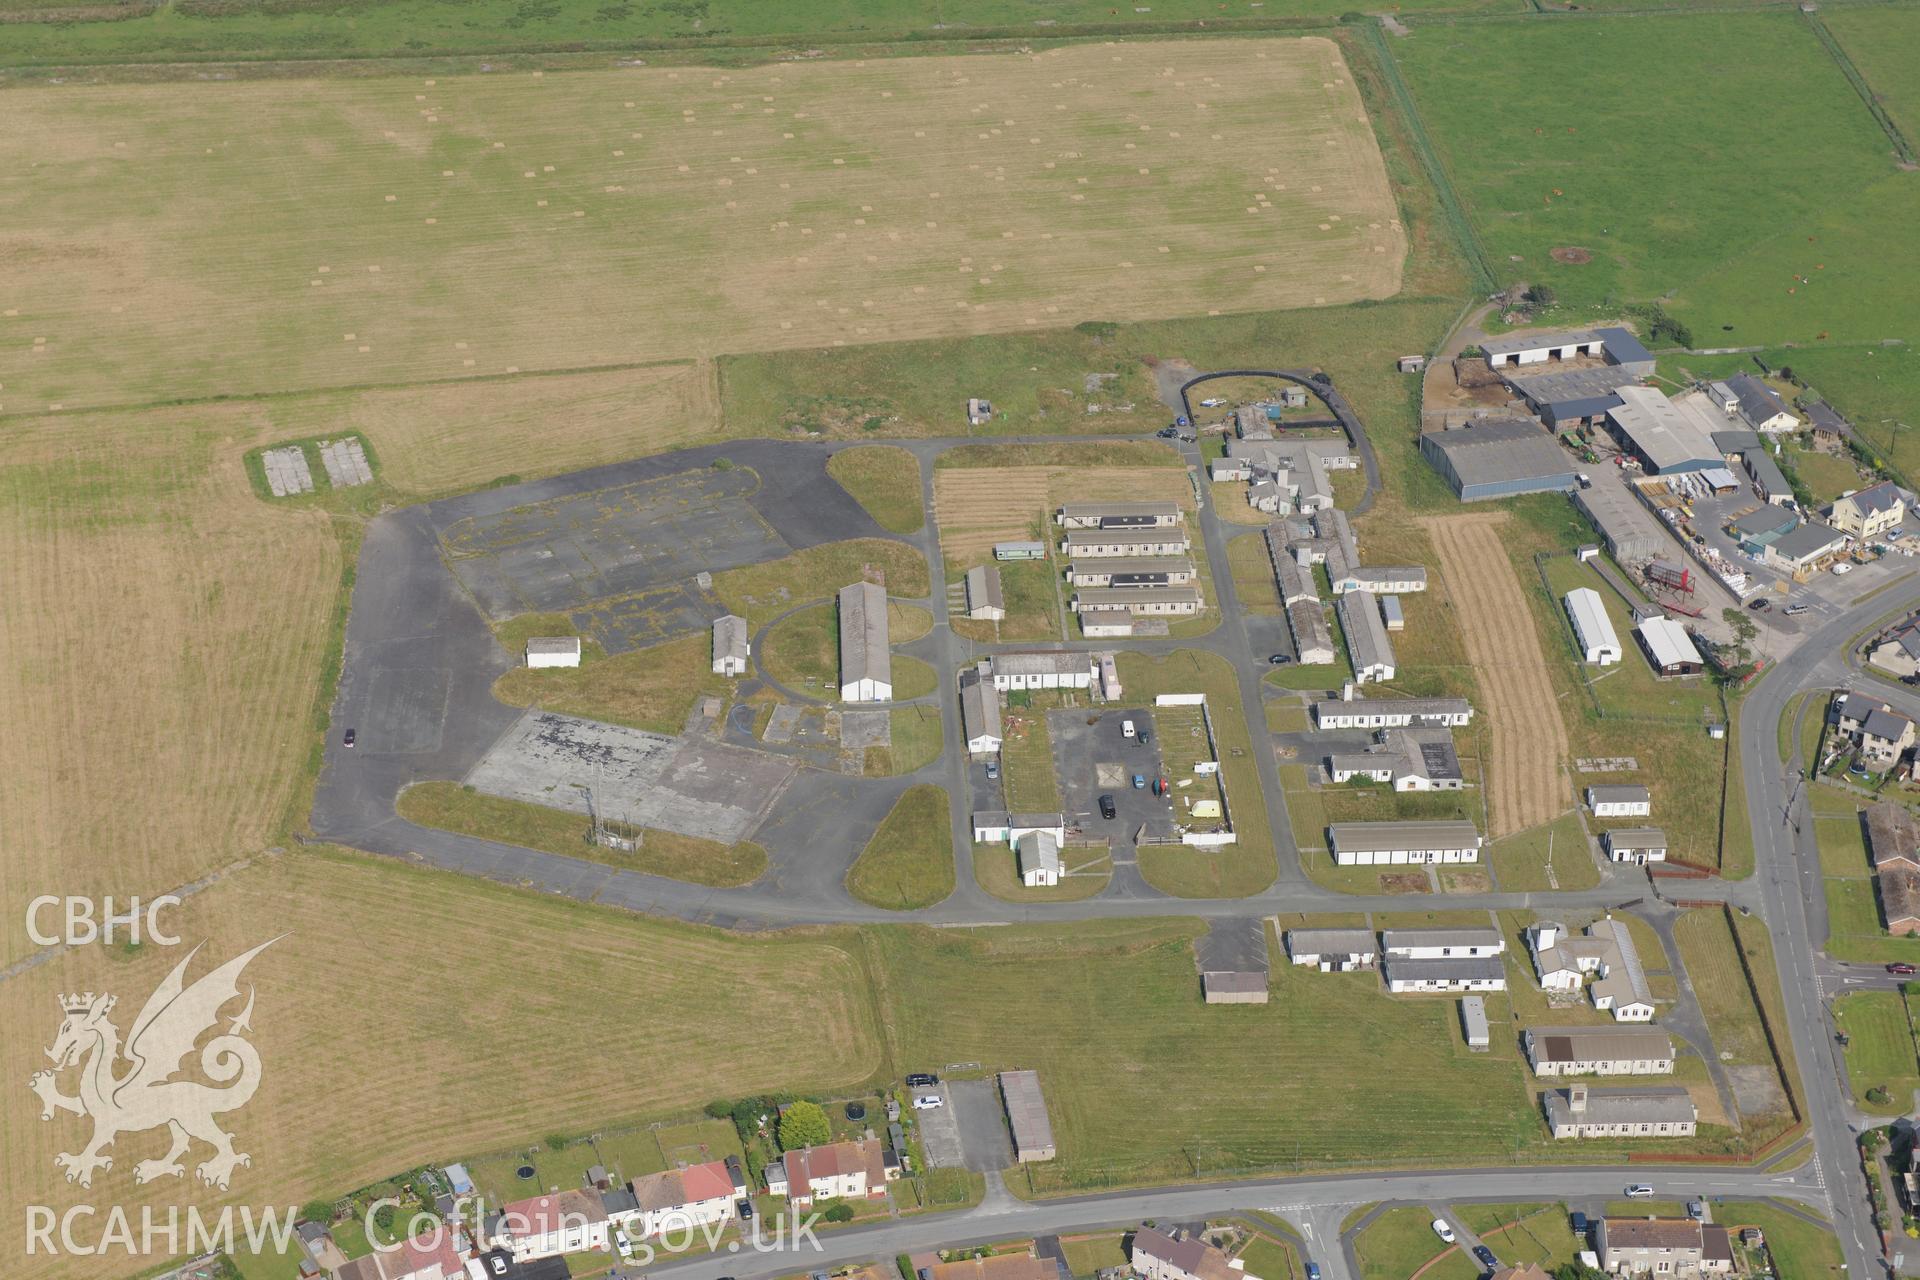 Tywyn airfield. Oblique aerial photograph taken during RCAHMW?s programme of archaeological aerial reconnaissance by Toby Driver, 12th July 2013.